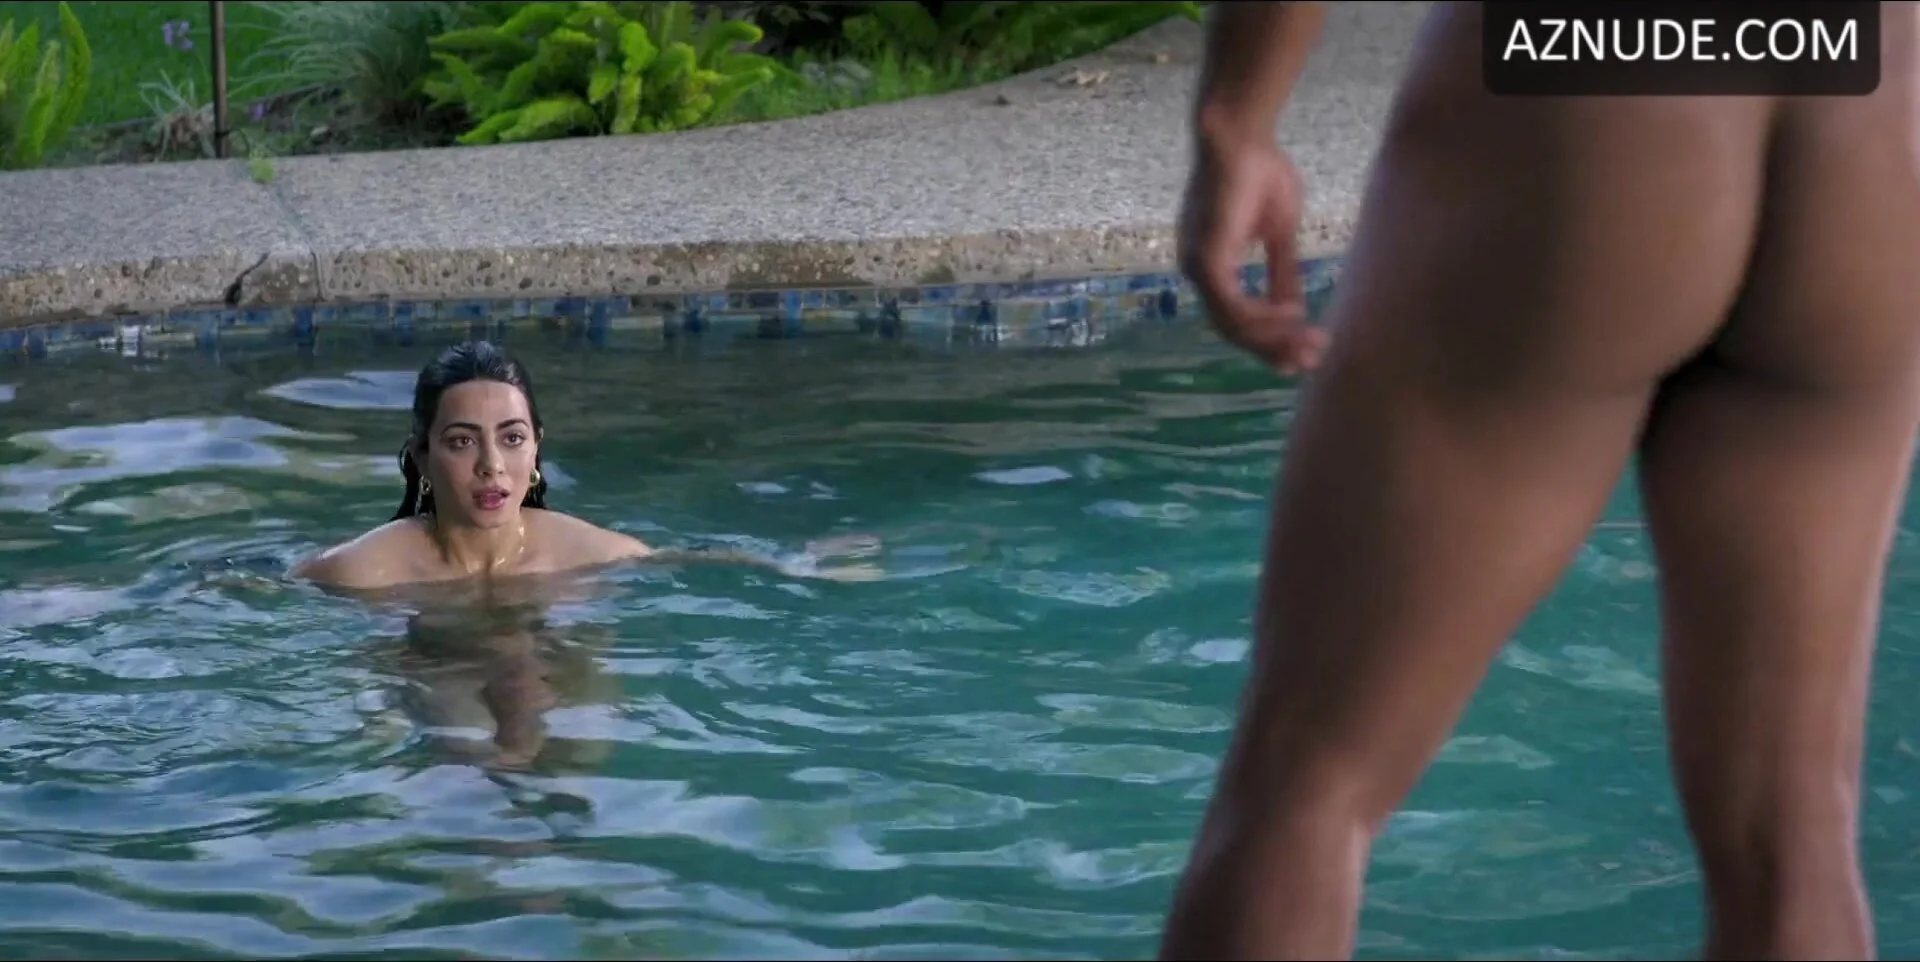 ashu kats recommends Milfs Skinny Dipping By The Pool